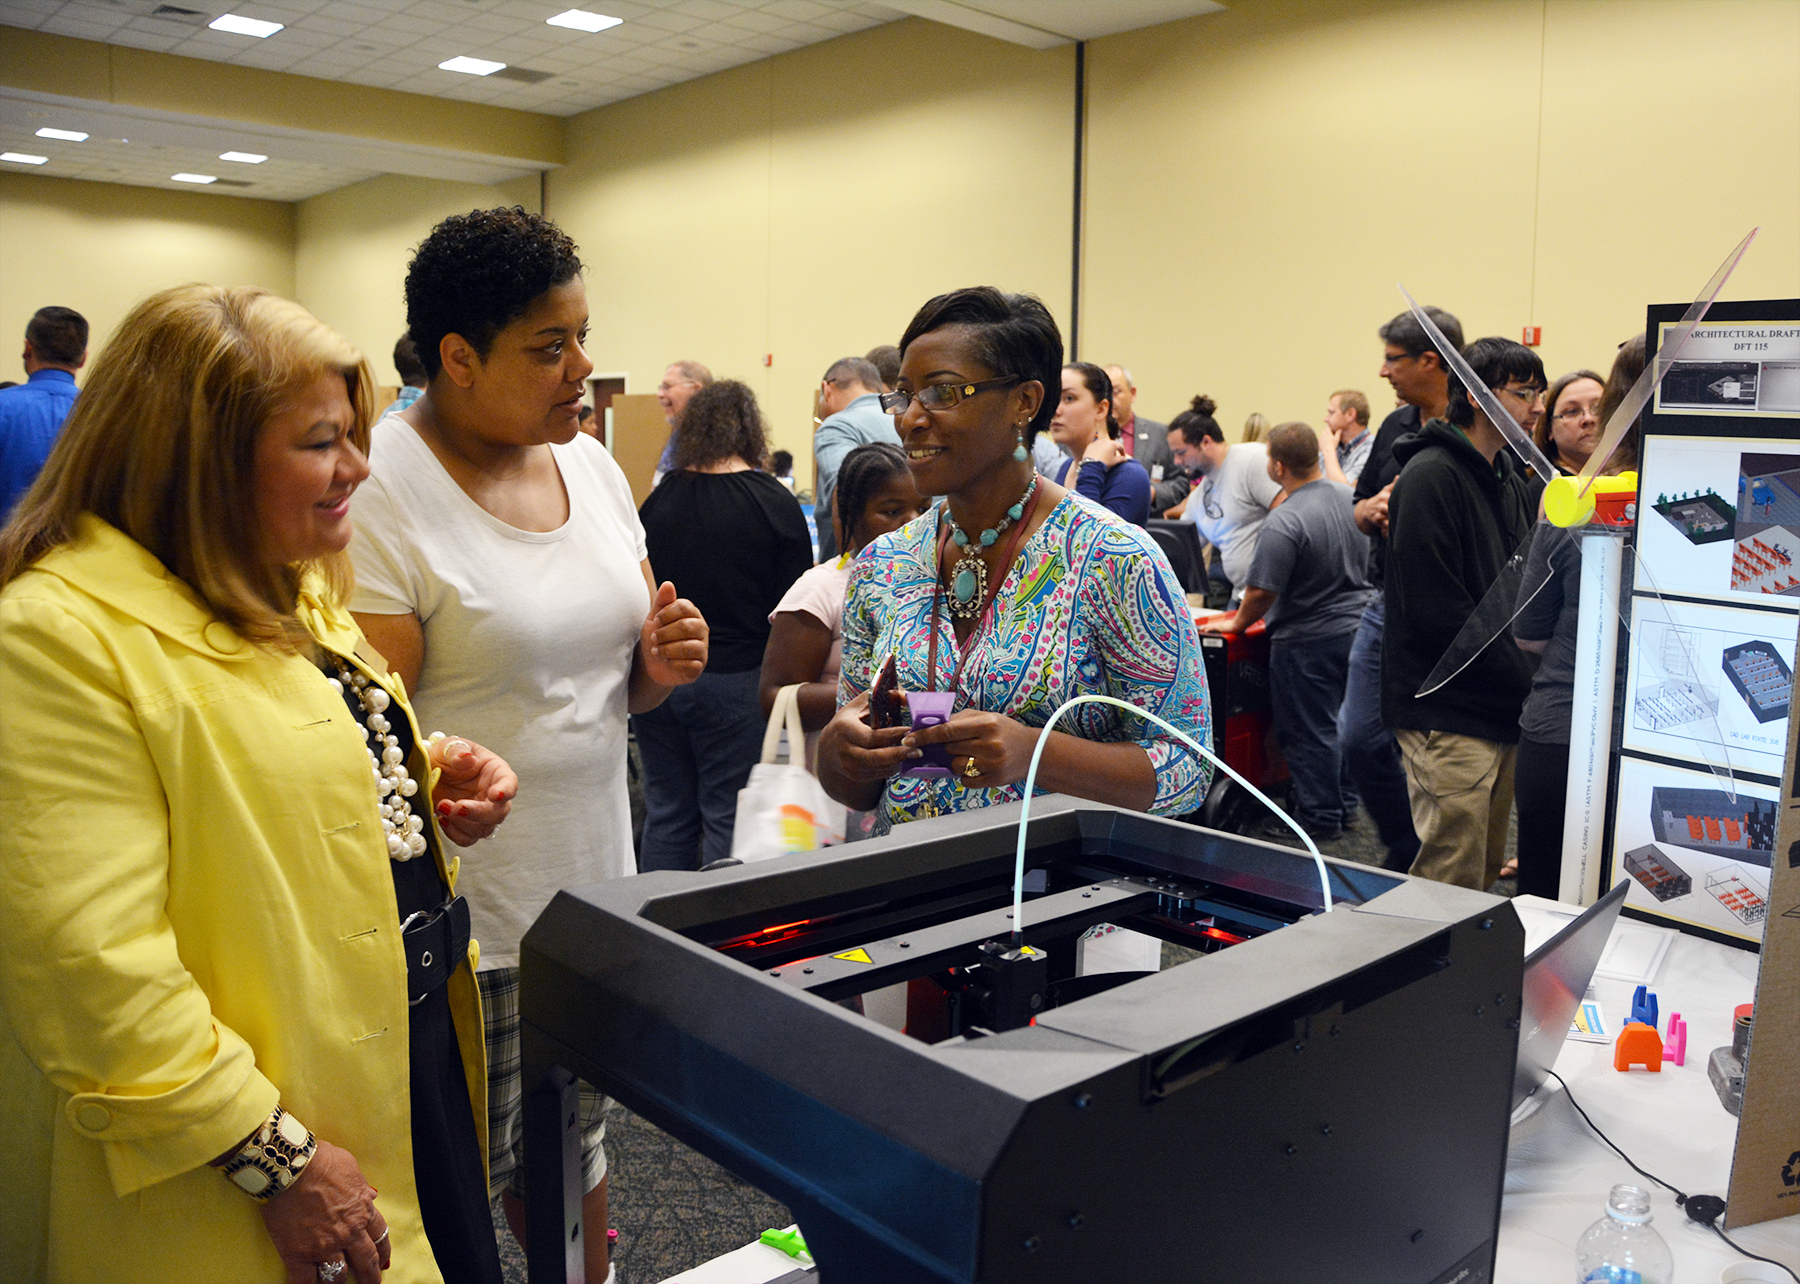 Mechanical Engineering lead instructor Annie Smith, right, explains how her students design parts and then print them on a 3D printer, which she had on display during last year’s RichmondCC Open House. This year’s Open House is scheduled for Thursday, April 27, from 5:30 to 7:30 p.m. at the Cole Auditorium.